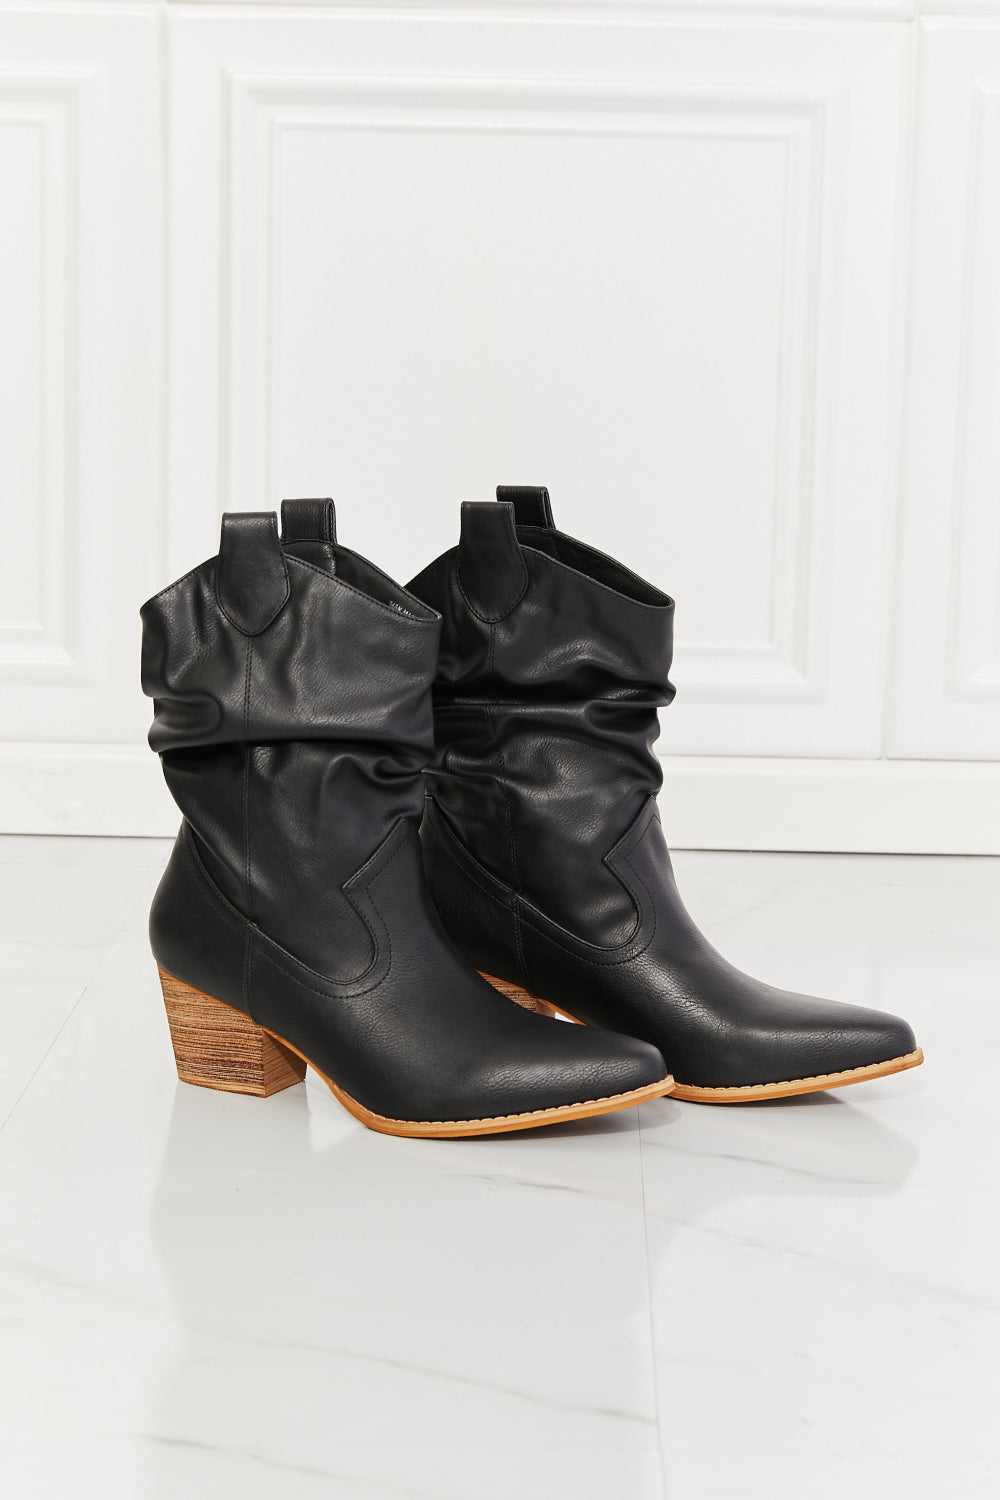 MMShoes Better in Texas Scrunch Cowboy Boots in Black - Tigbul's Fashion